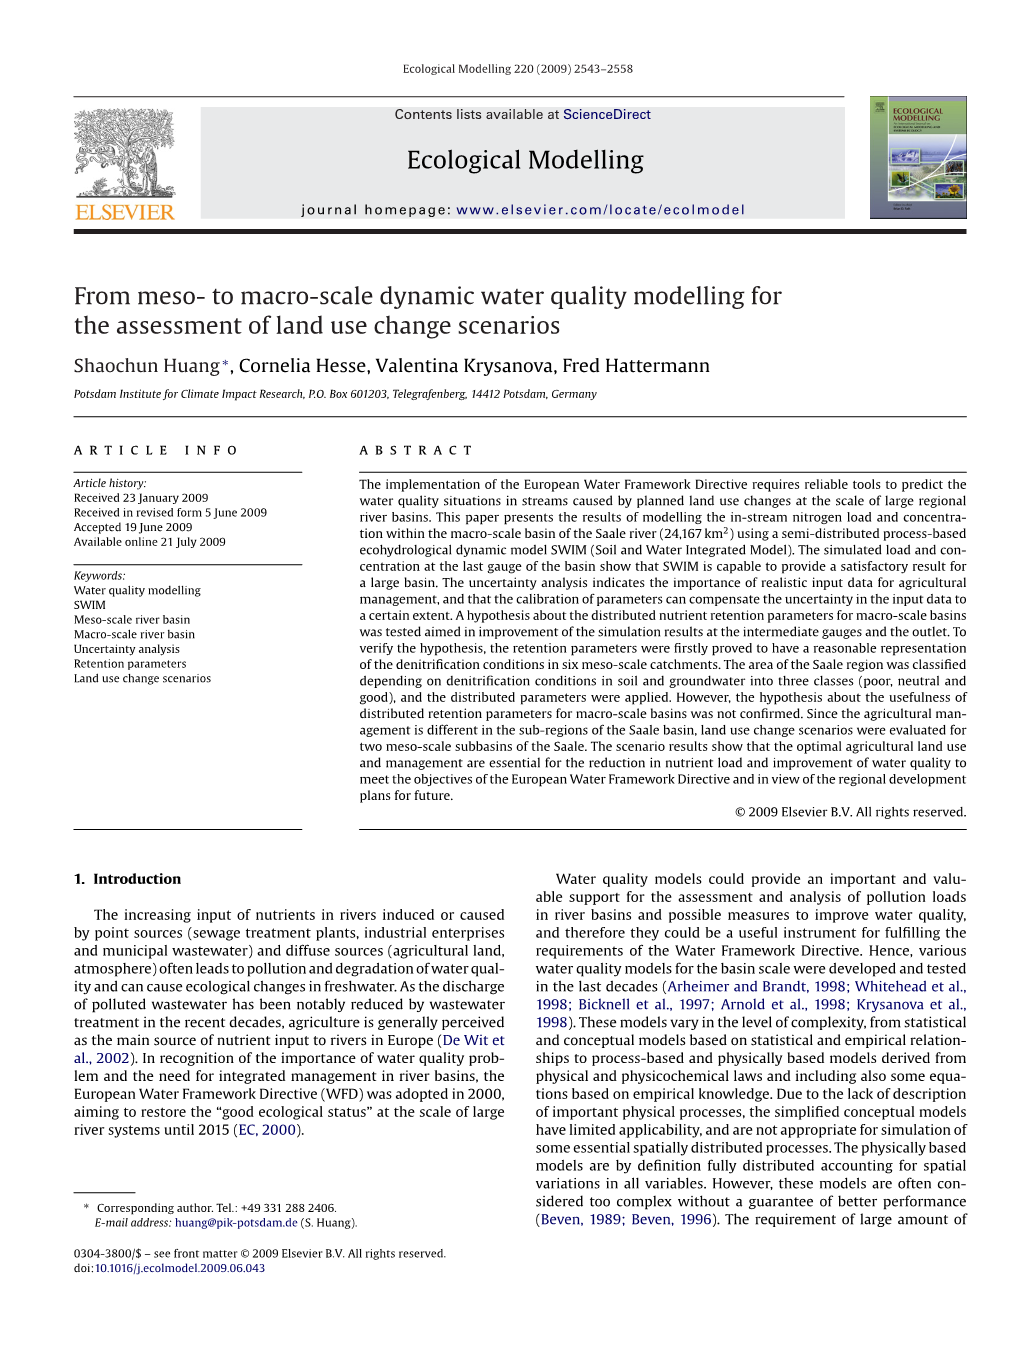 Huang from Meso to Macro Scale Dynamic Water Quality Modelling.Pdf